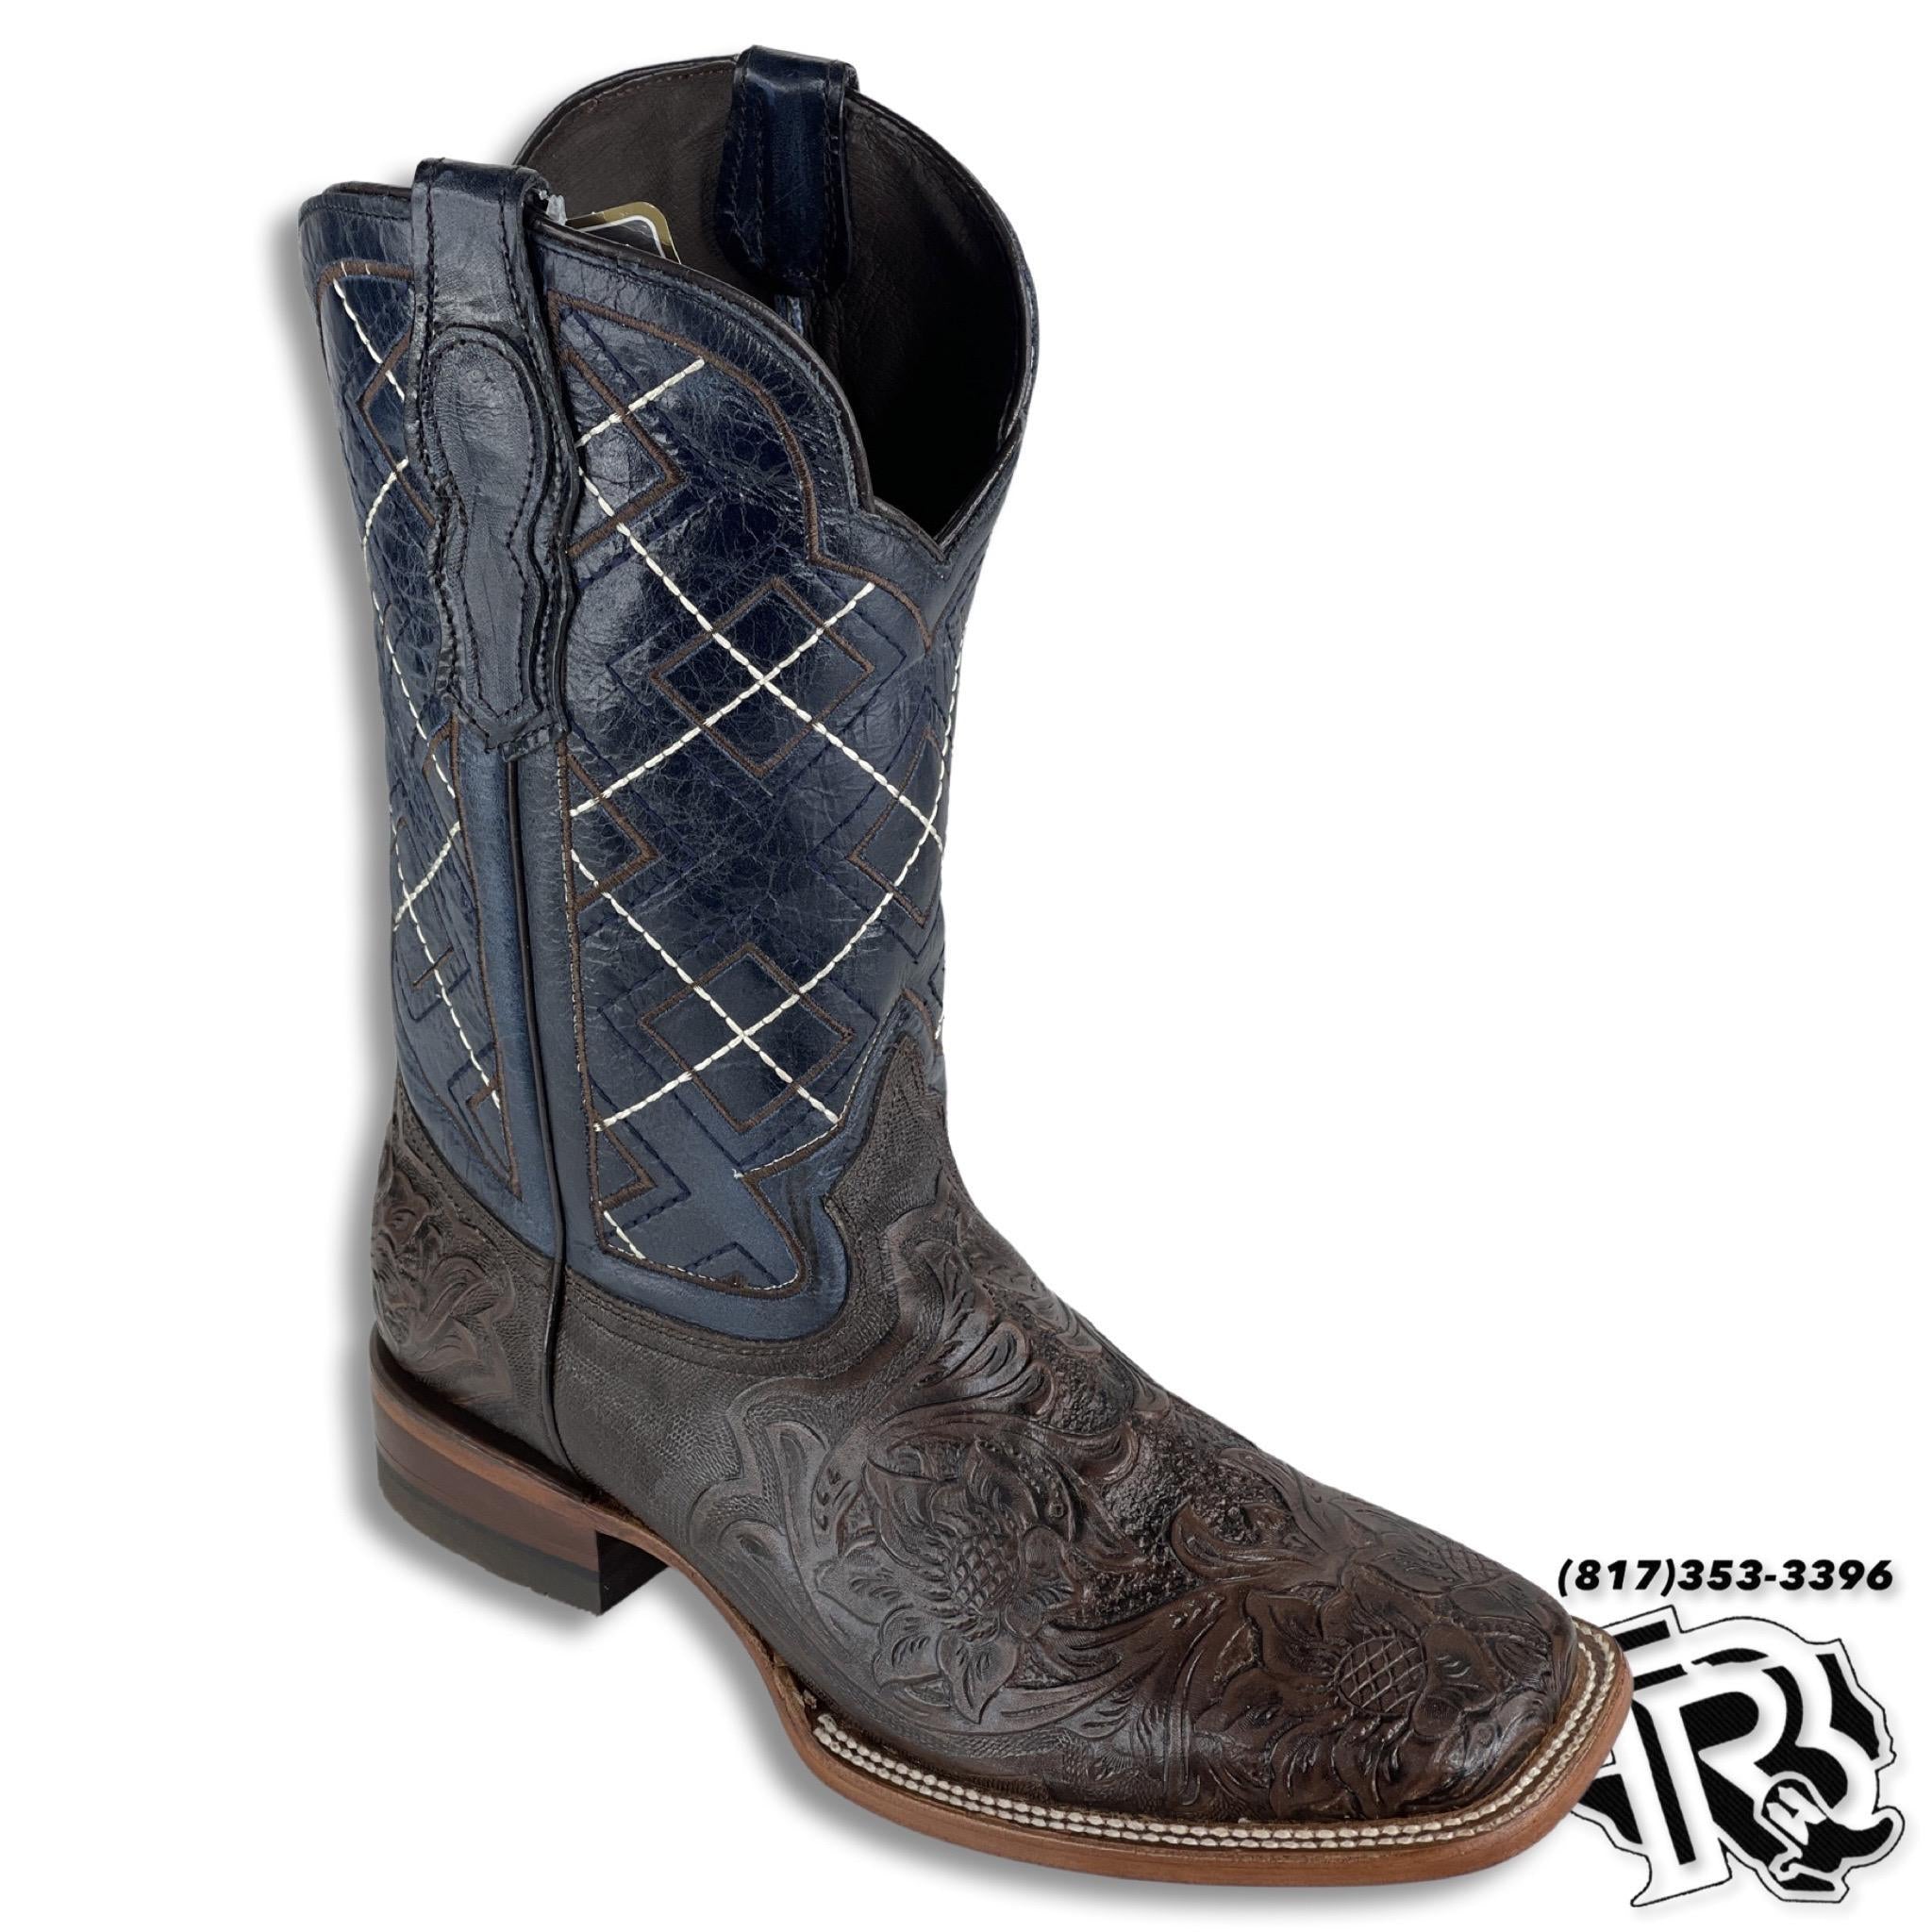 TOOLED LEATHER PRINT | BROWN MEN SQUARE TOE WESTERN COWBOY BOOTS